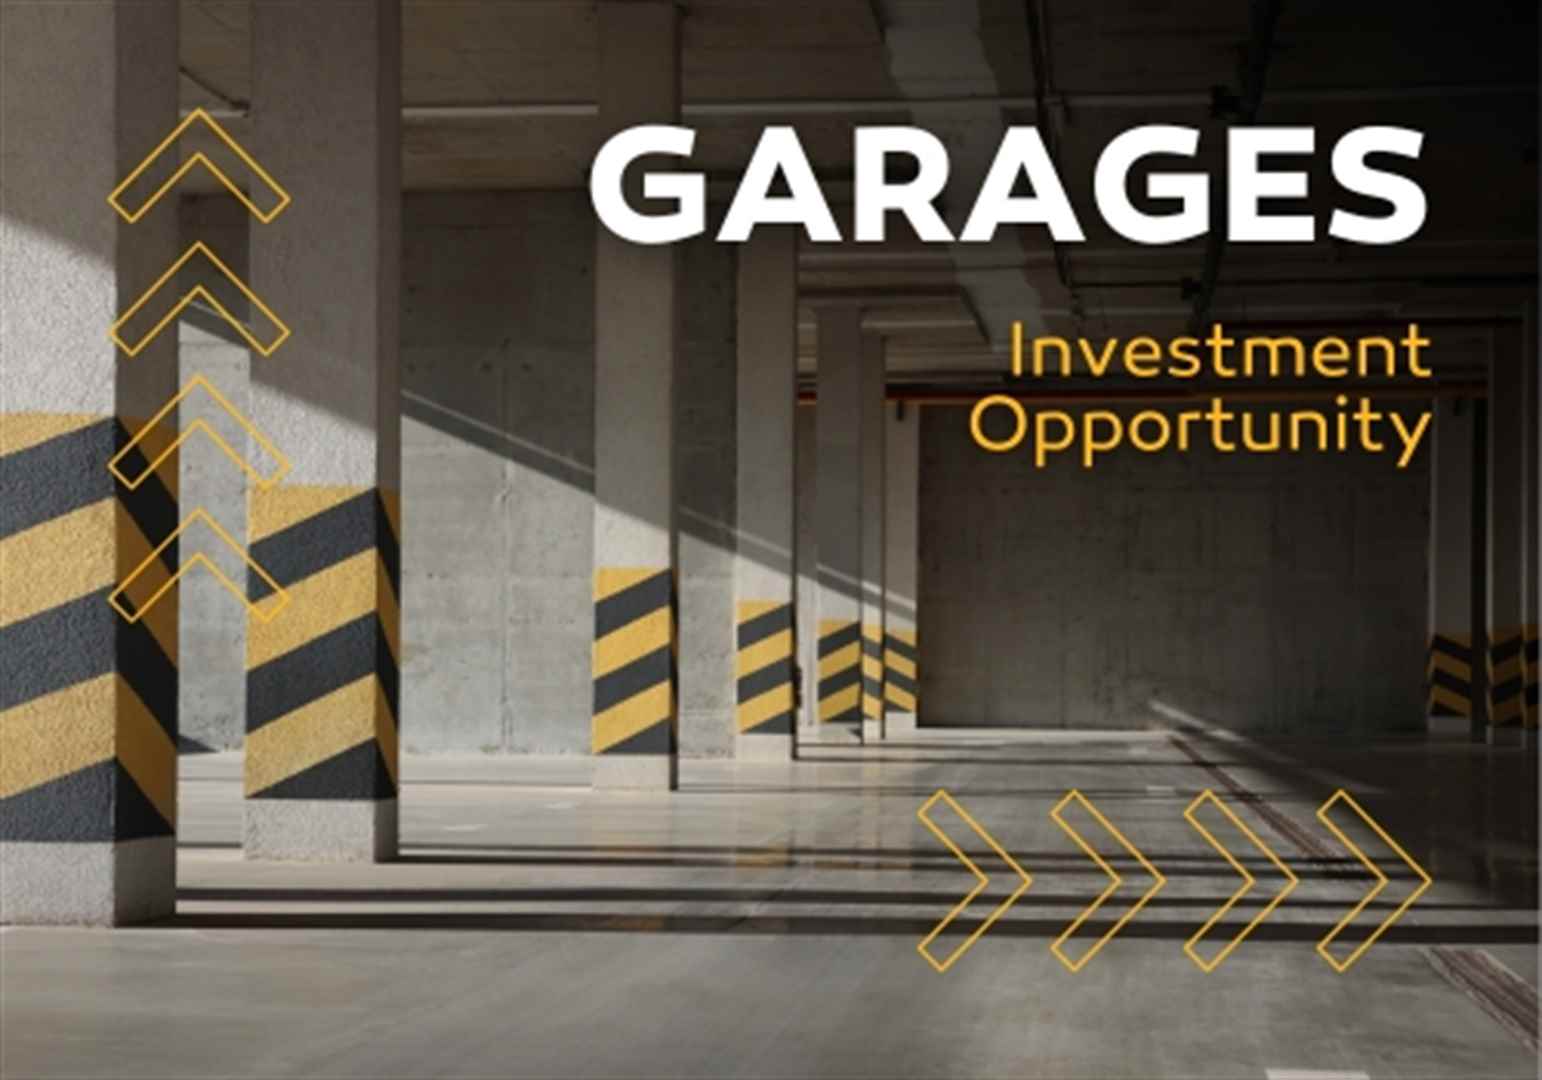 Garages, Investment Opportunity